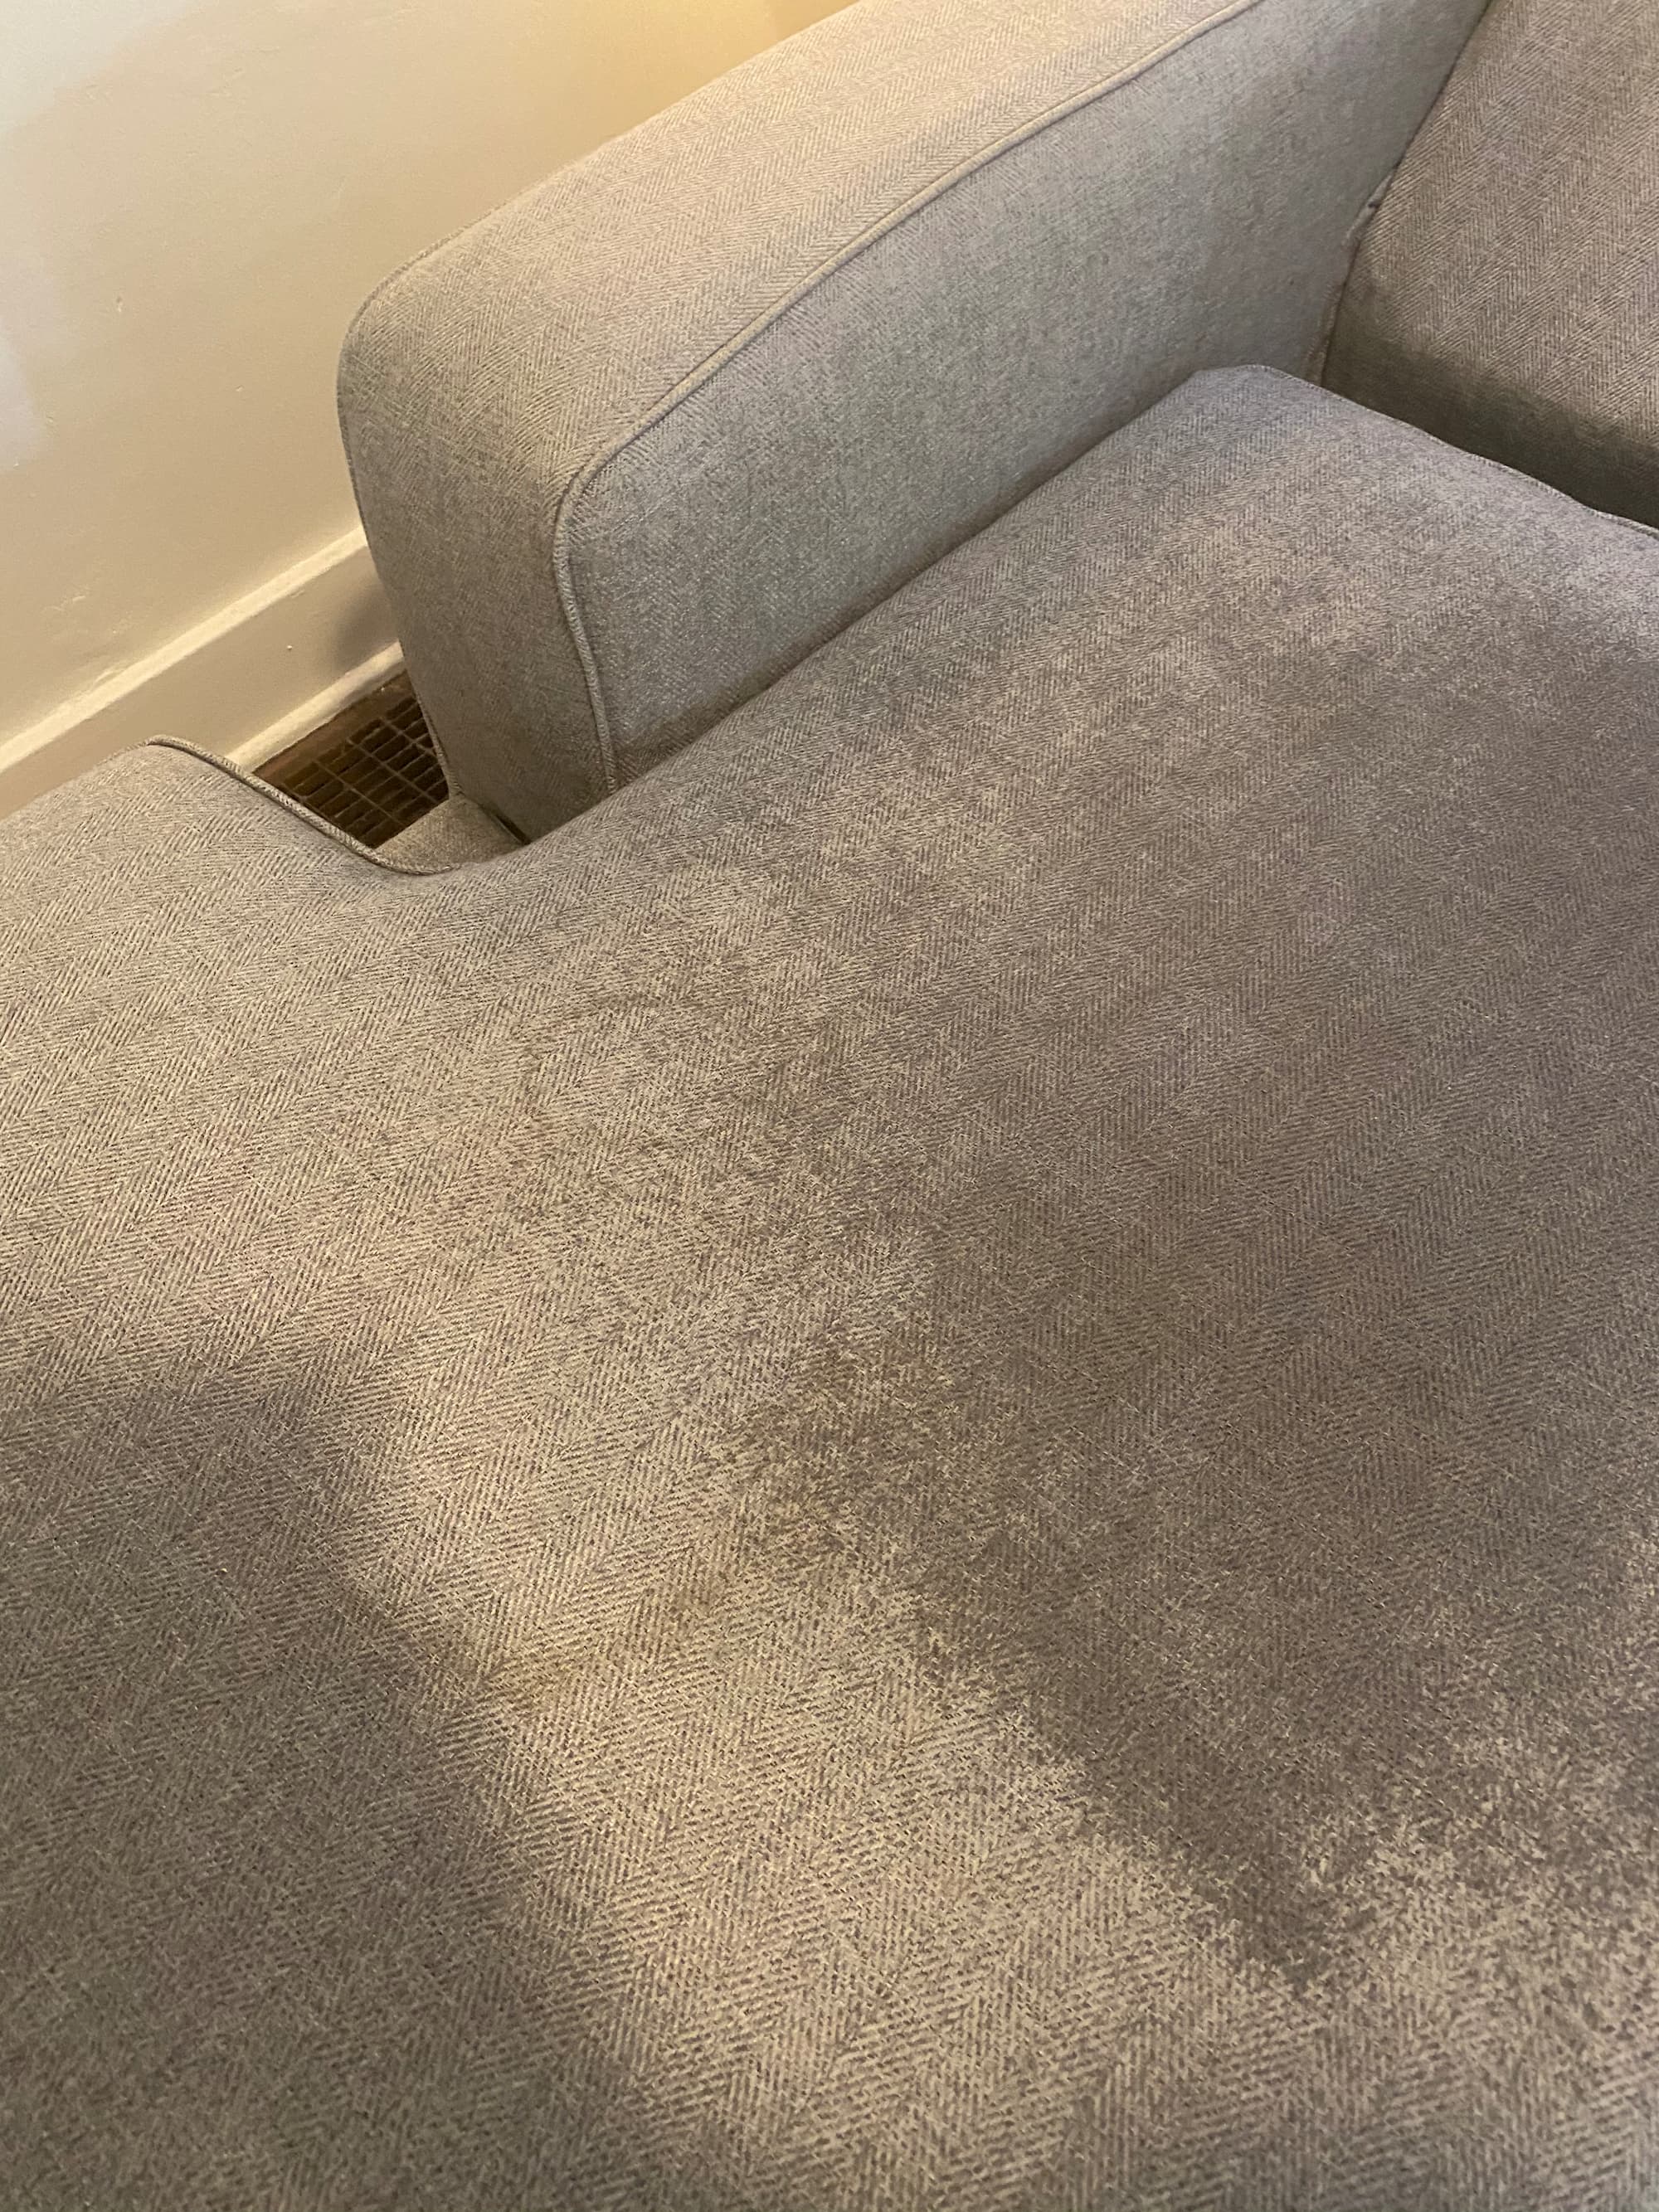 Carpet upholstery sectional cleaning pittsburgh pa